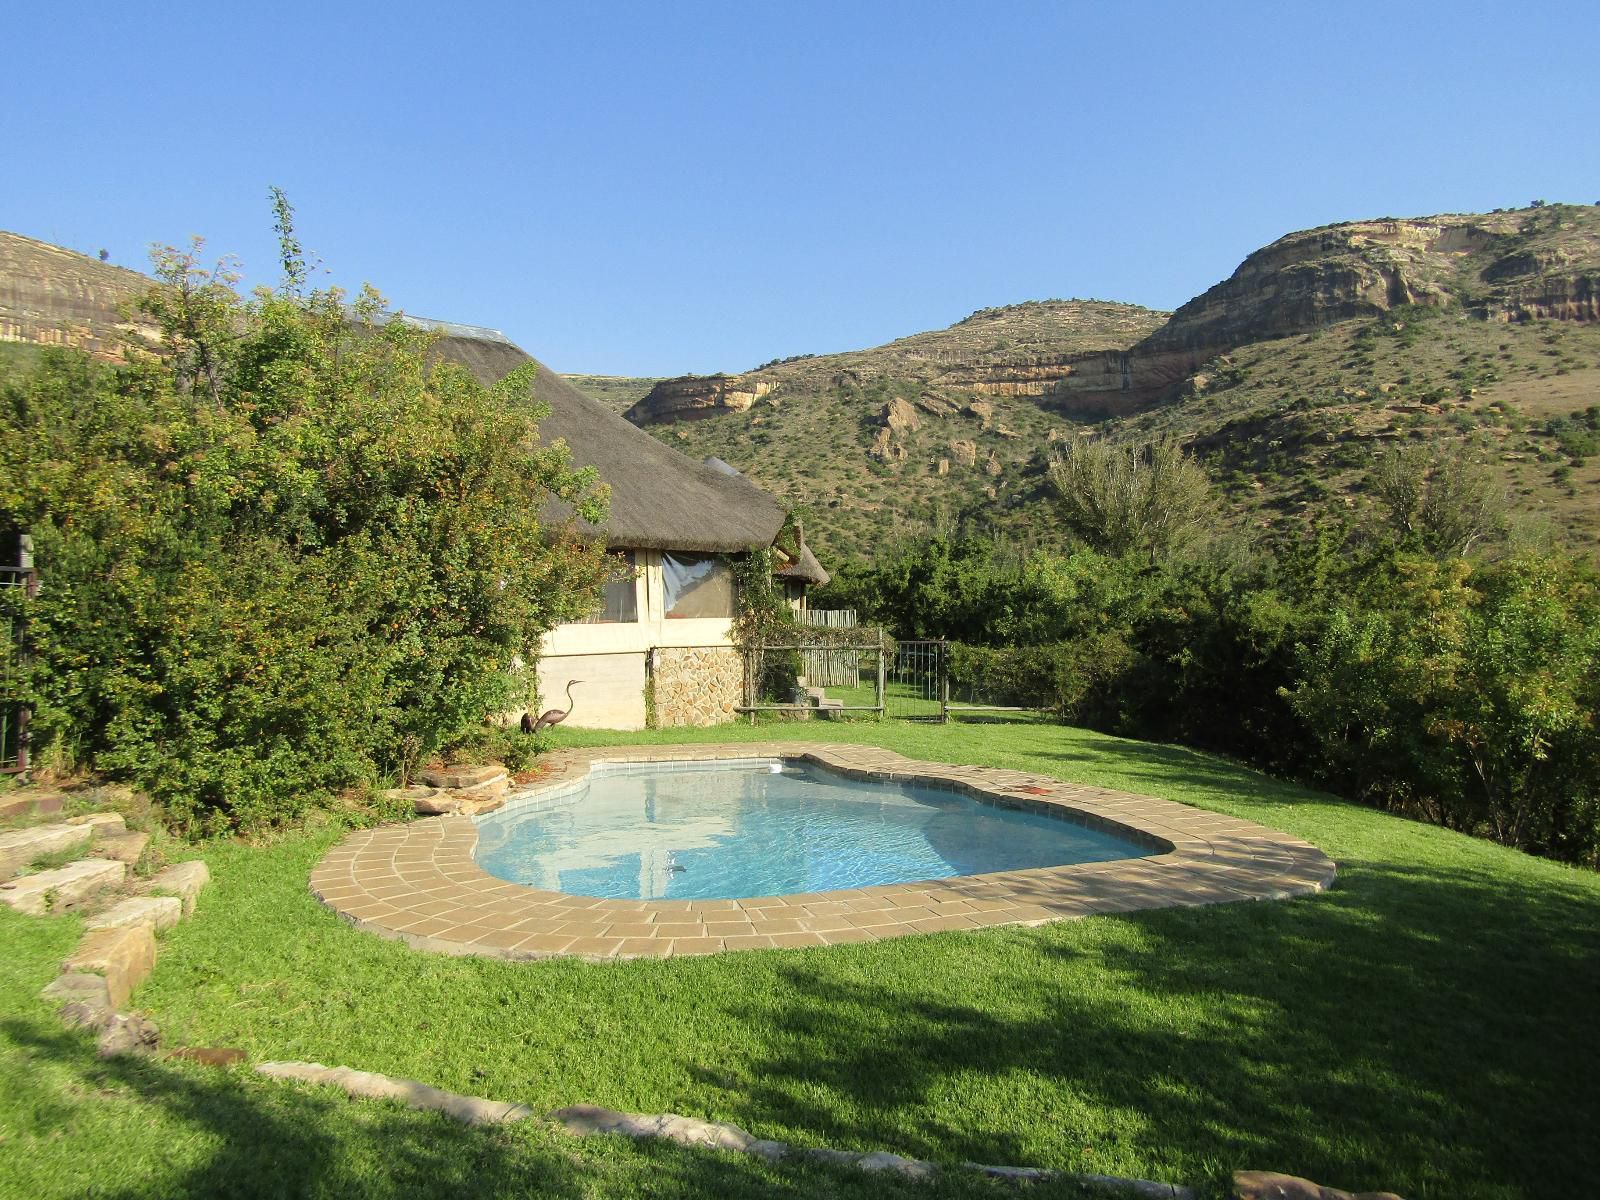 Mafube Mountain Retreat Fouriesburg Free State South Africa Complementary Colors, Garden, Nature, Plant, Swimming Pool